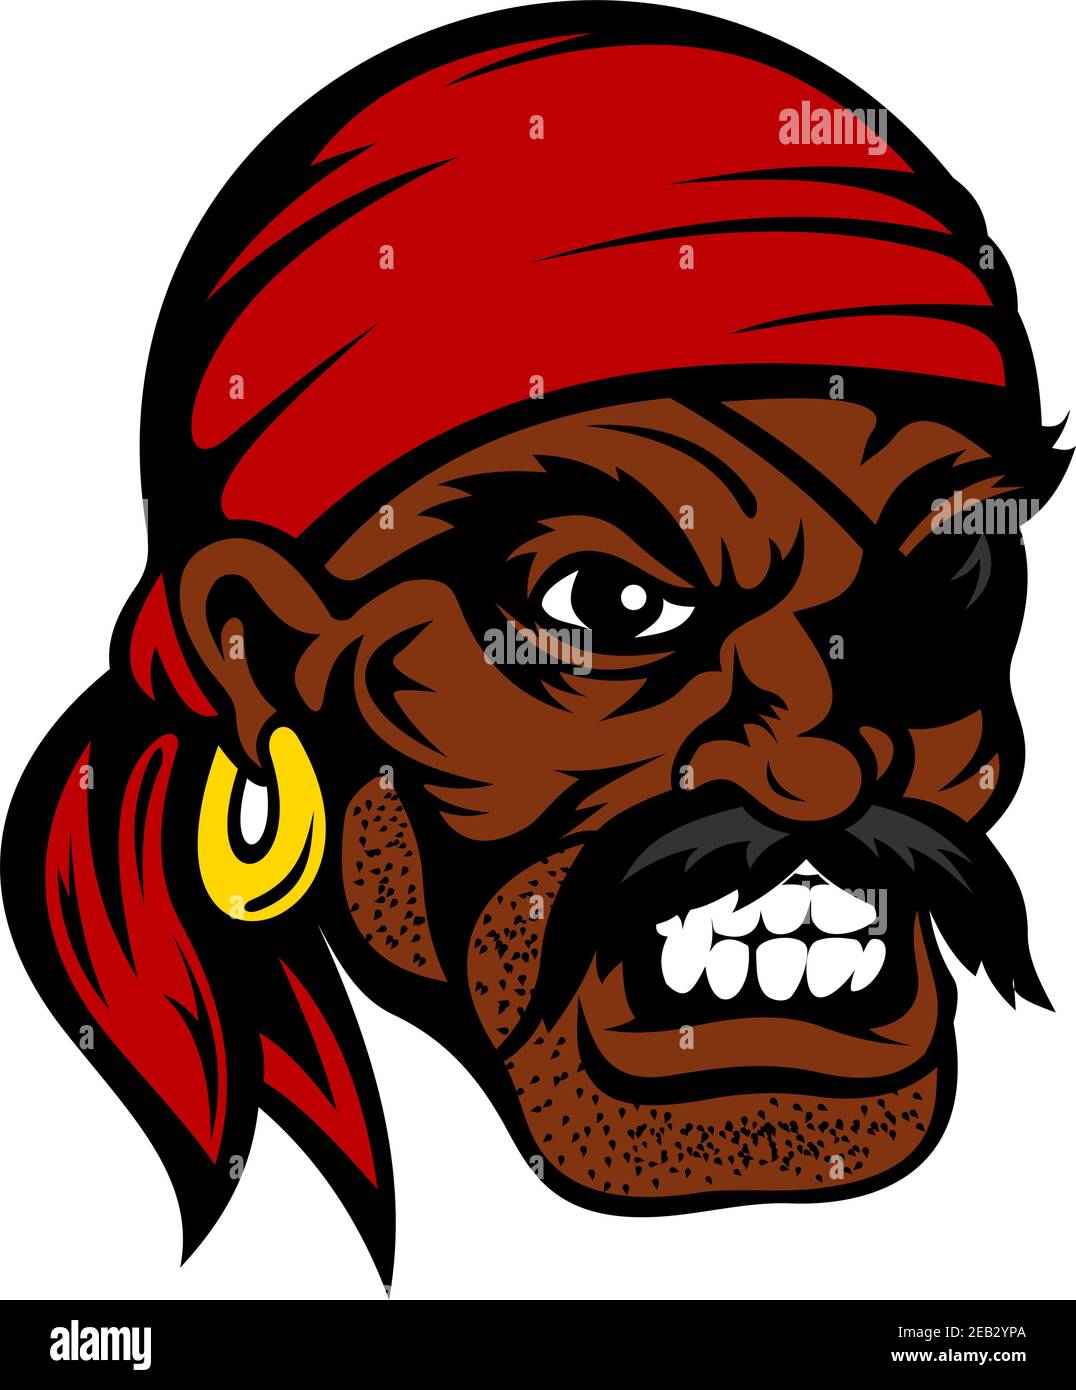 Growling cartoon african american pirate face with eye patch, red bandana and gold earring, for nautical or marine adventure themes design Stock Vector